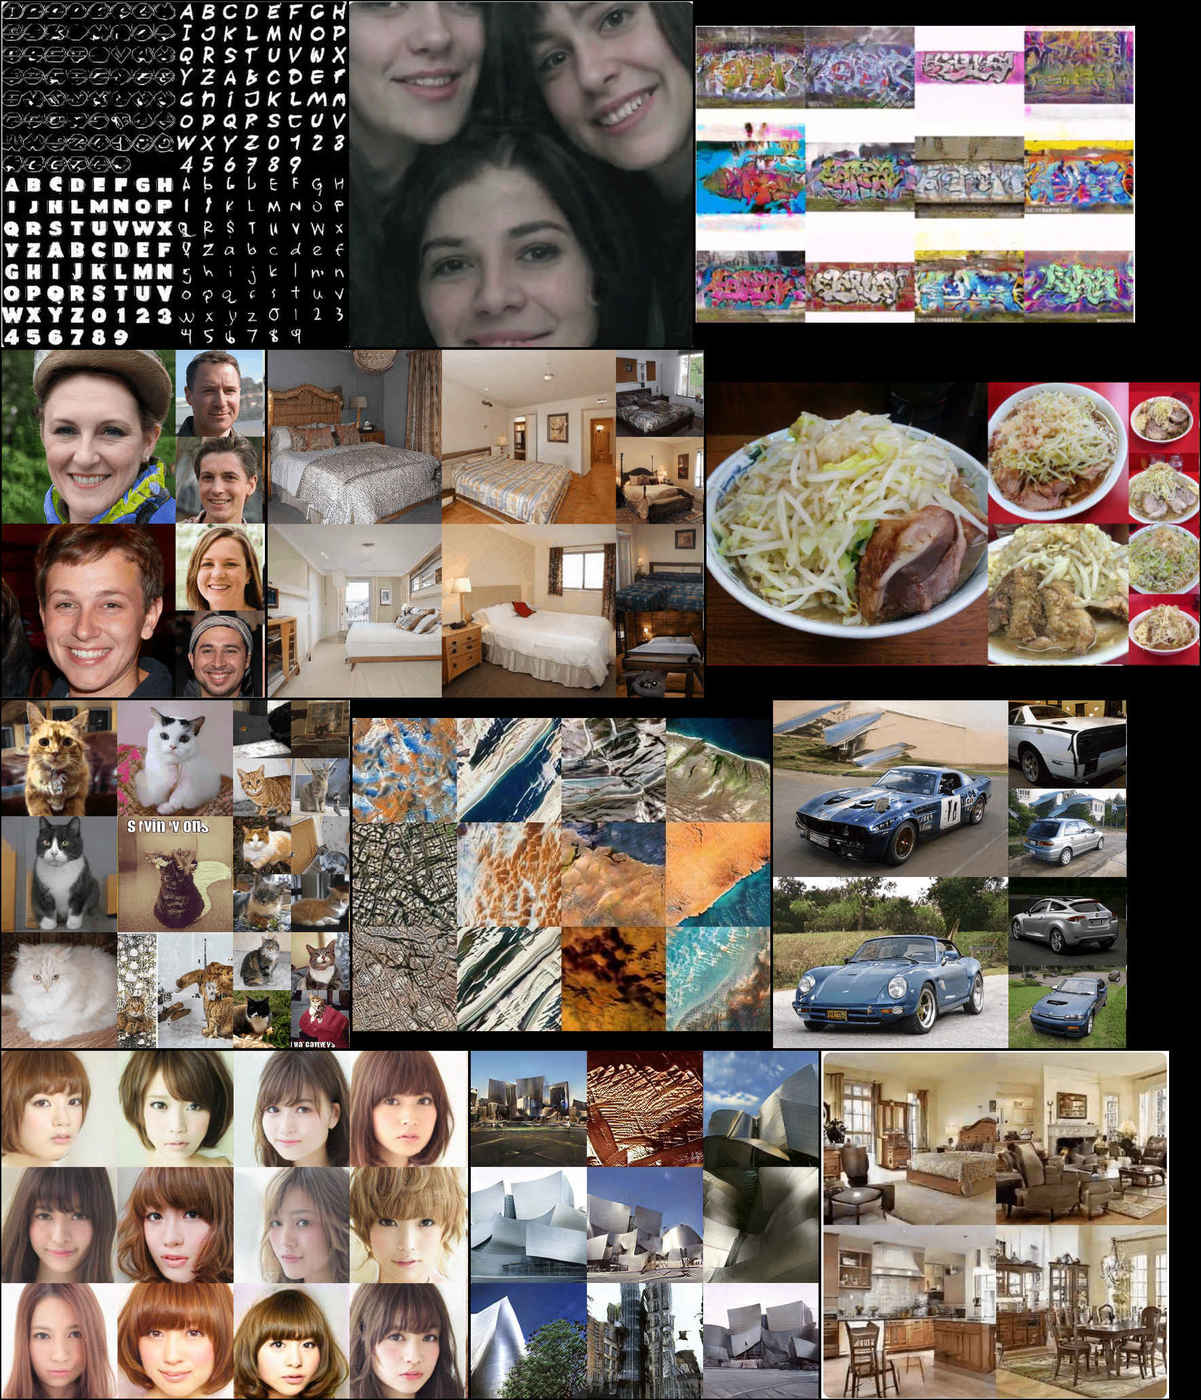 Imagequilt visualization of the wide range of visual subjects StyleGAN has been applied to